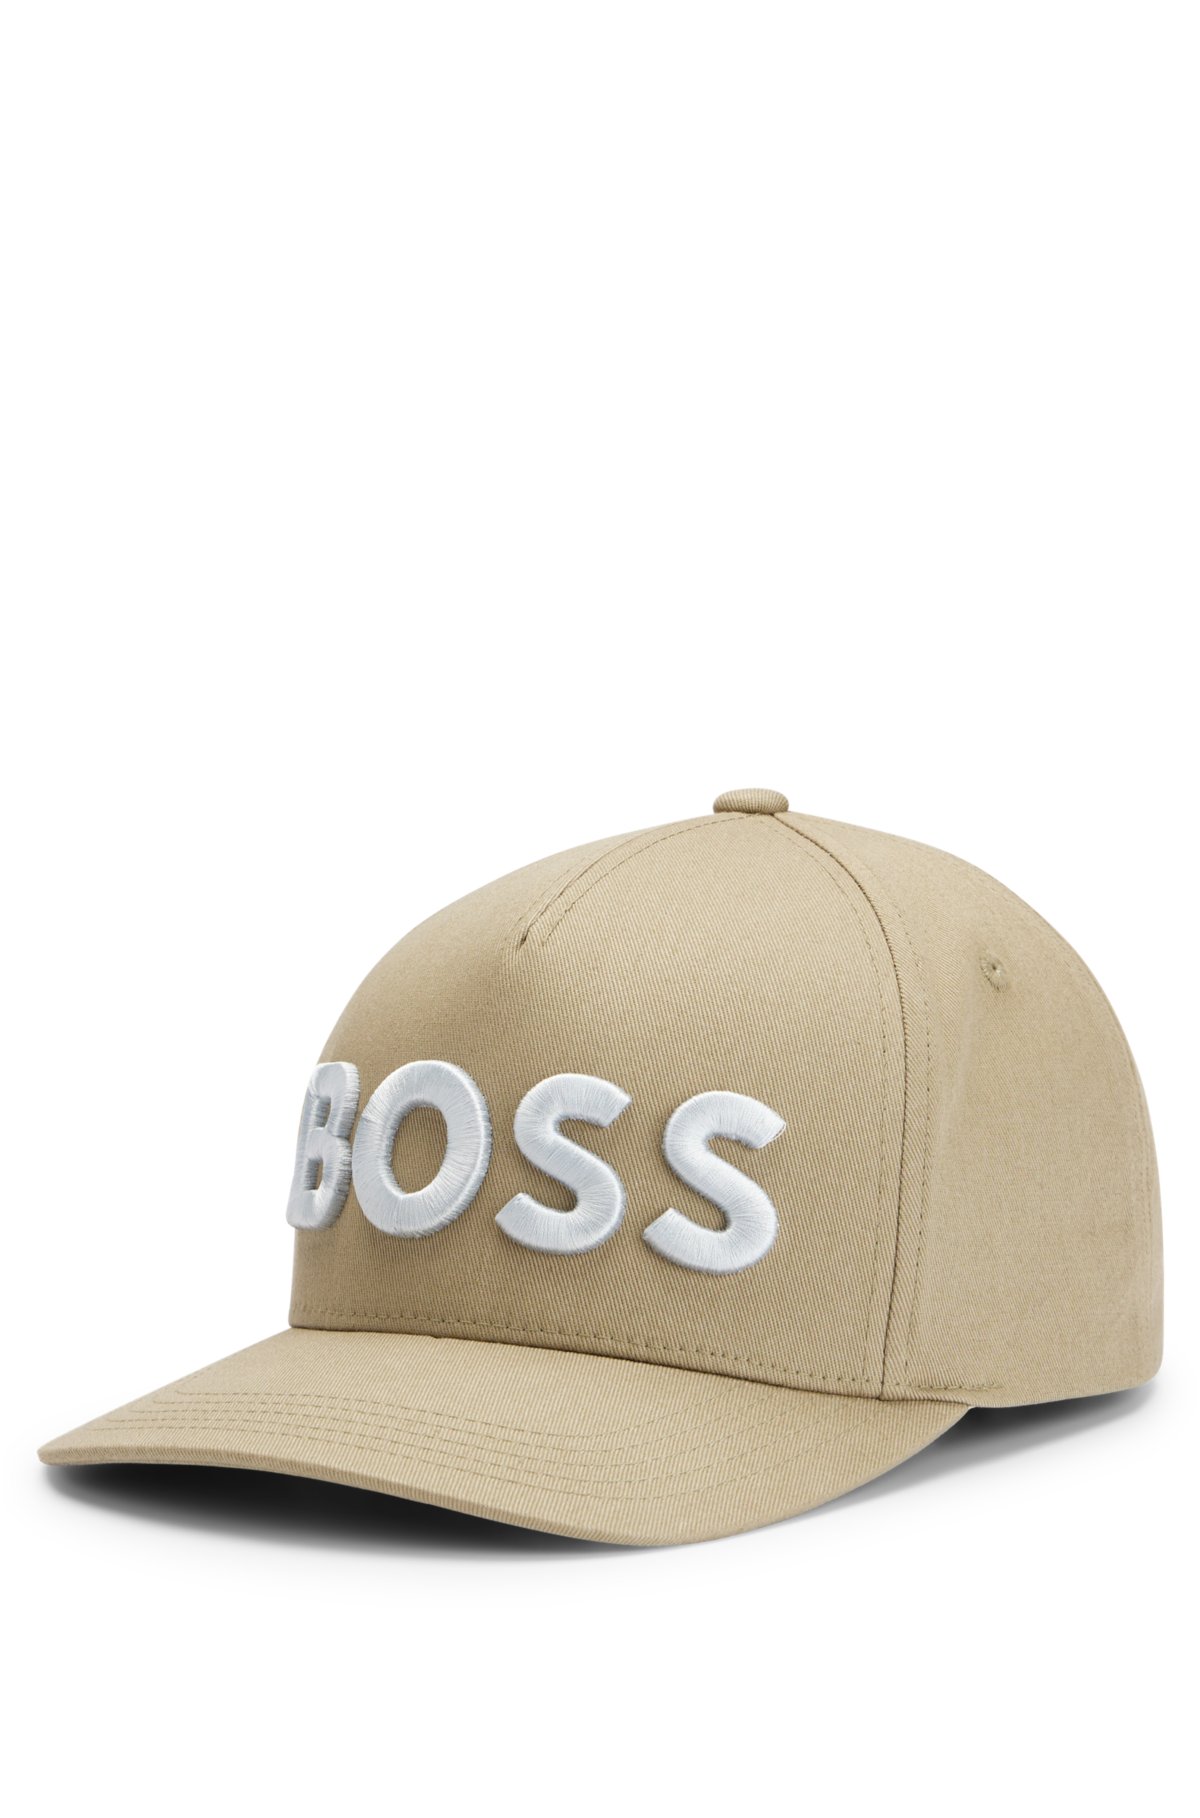 - strap logo adjustable BOSS Cotton-twill embroidered with and cap